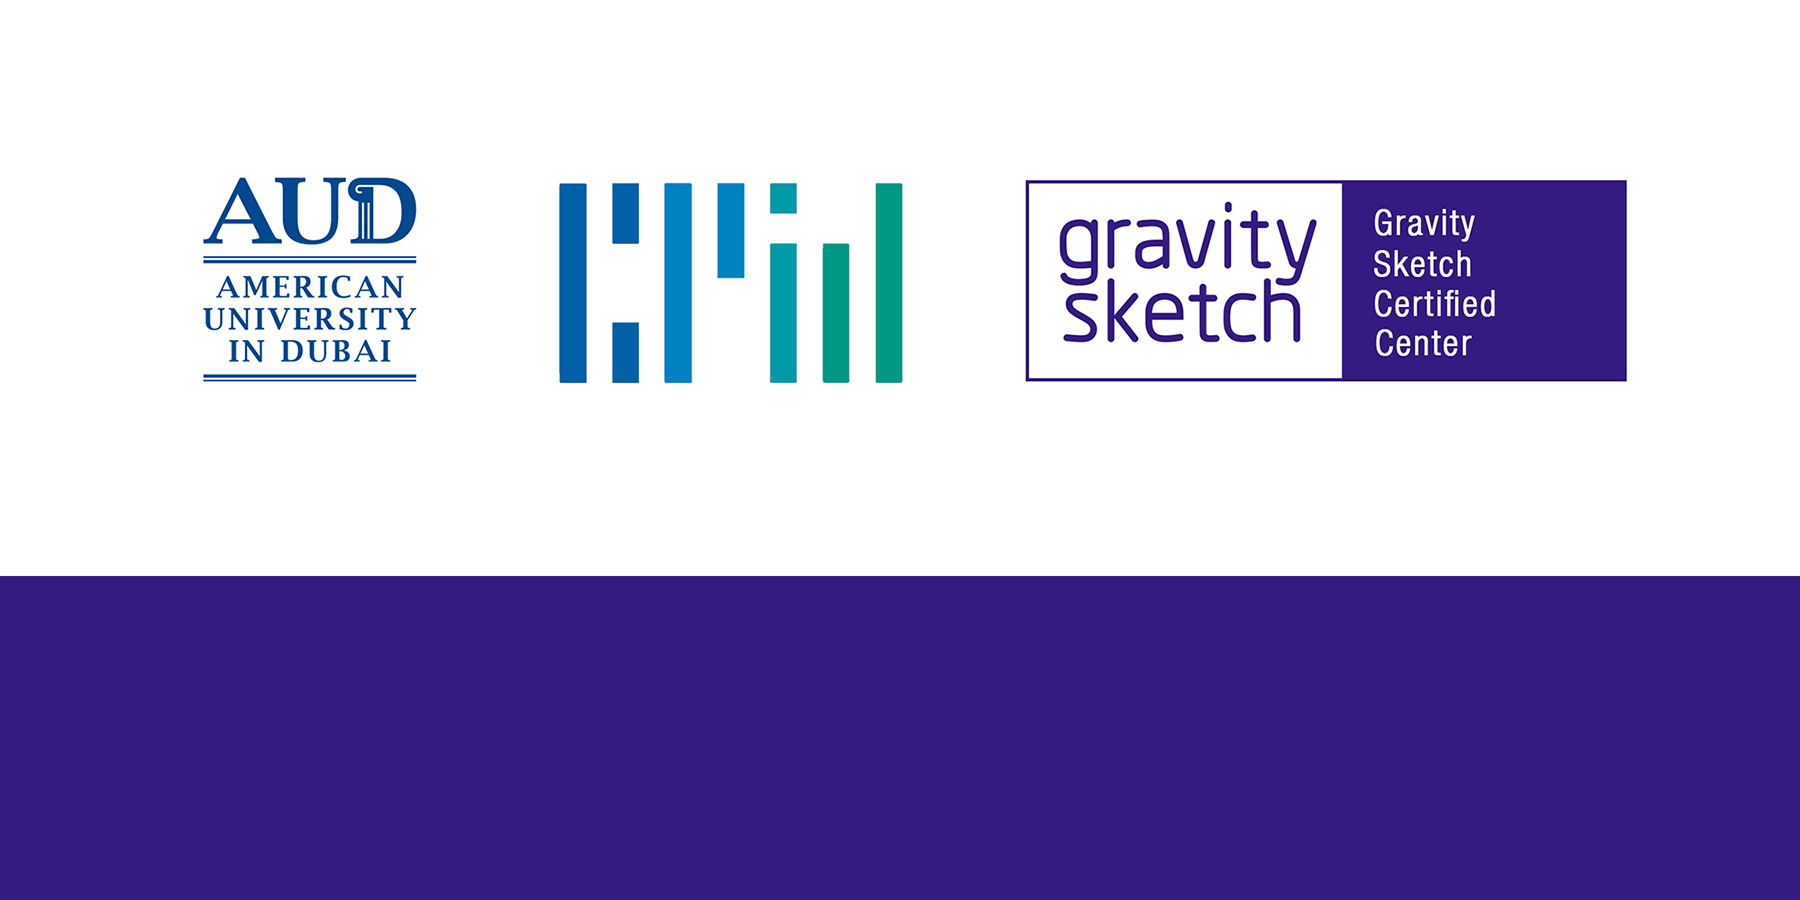 CRID at AUD is officially the first and only Gravity Sketch Certified Center in the UAE